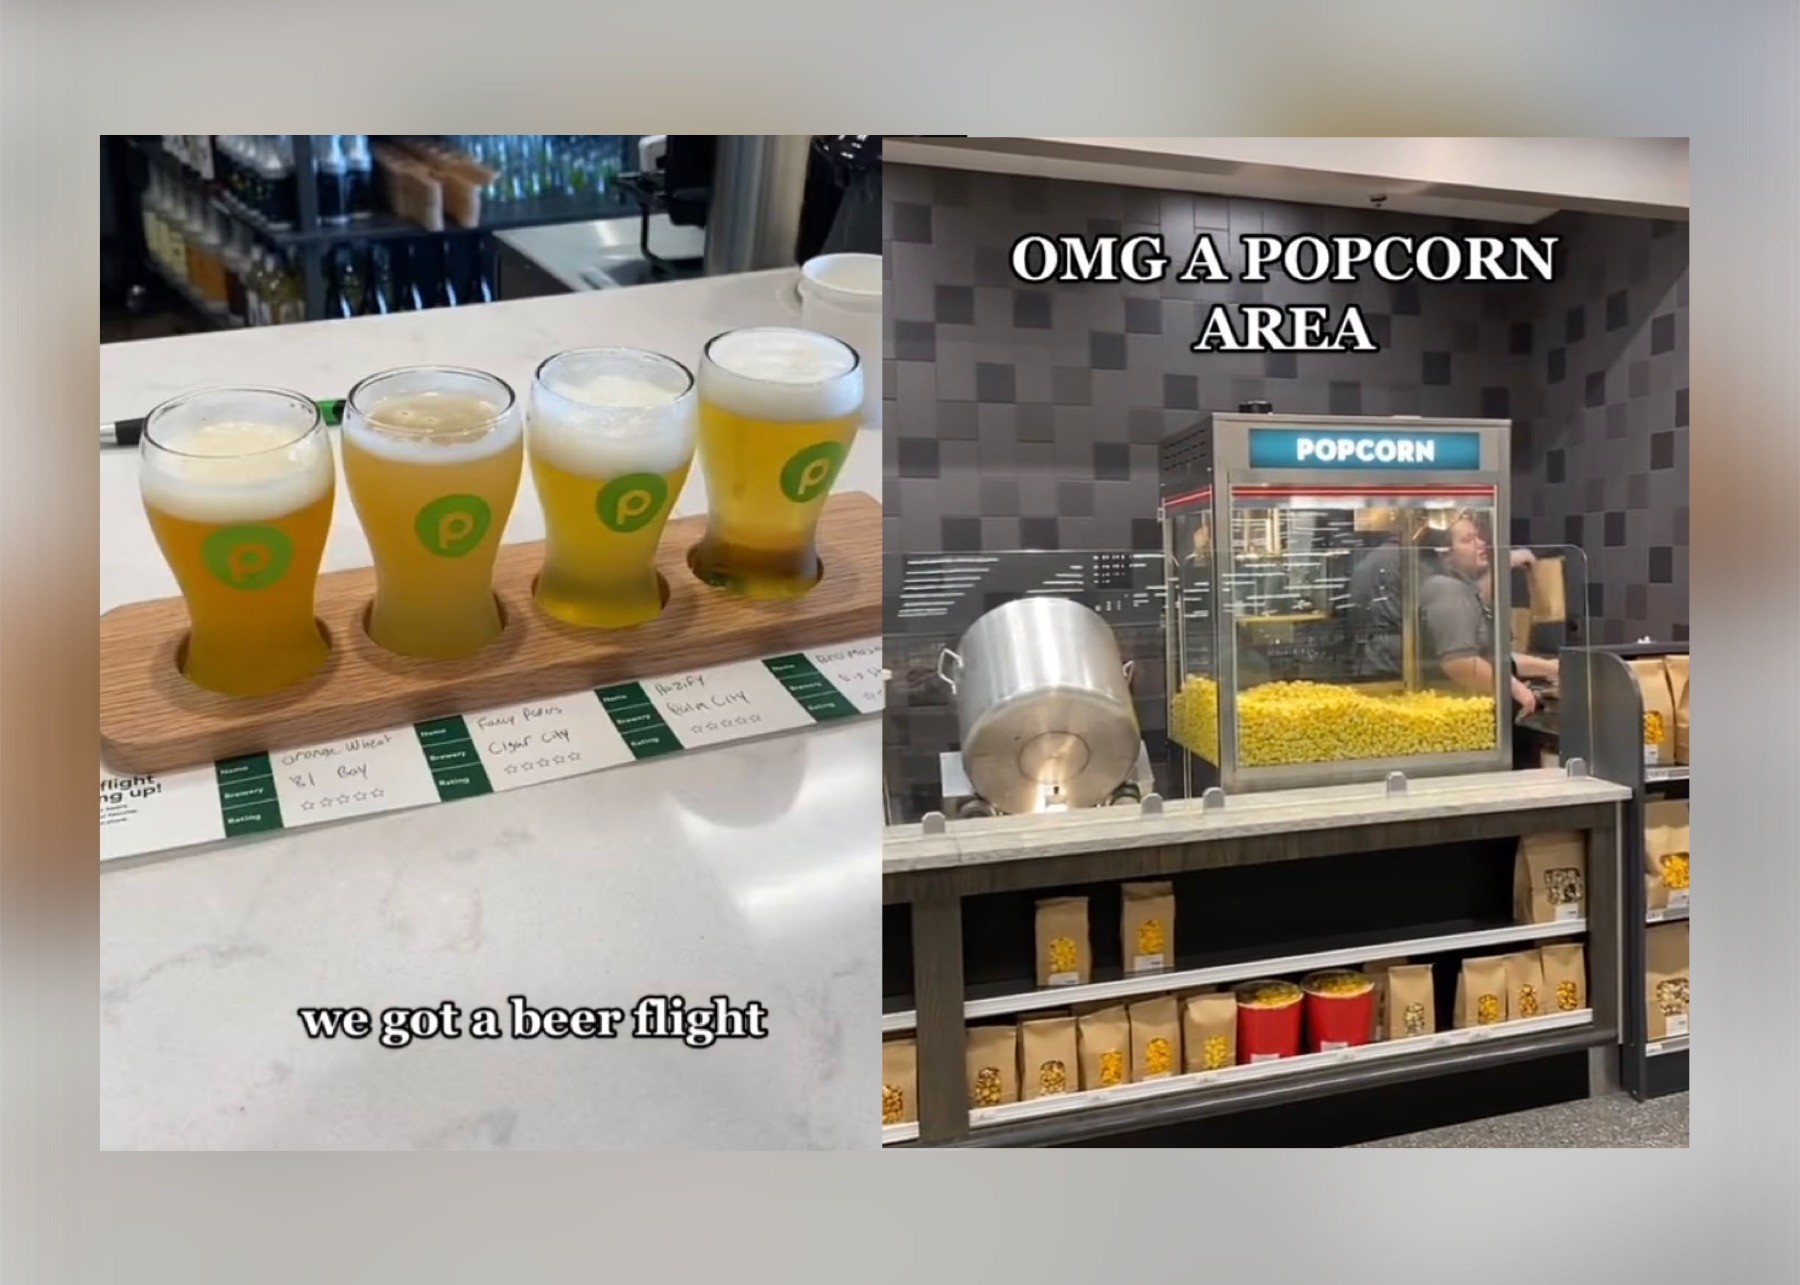 miaminewtimes.com - Nicole Lopez-Alvar - Florida Publix Goes Viral for Wine and Beer Bar, Burrito Station, and Food Court